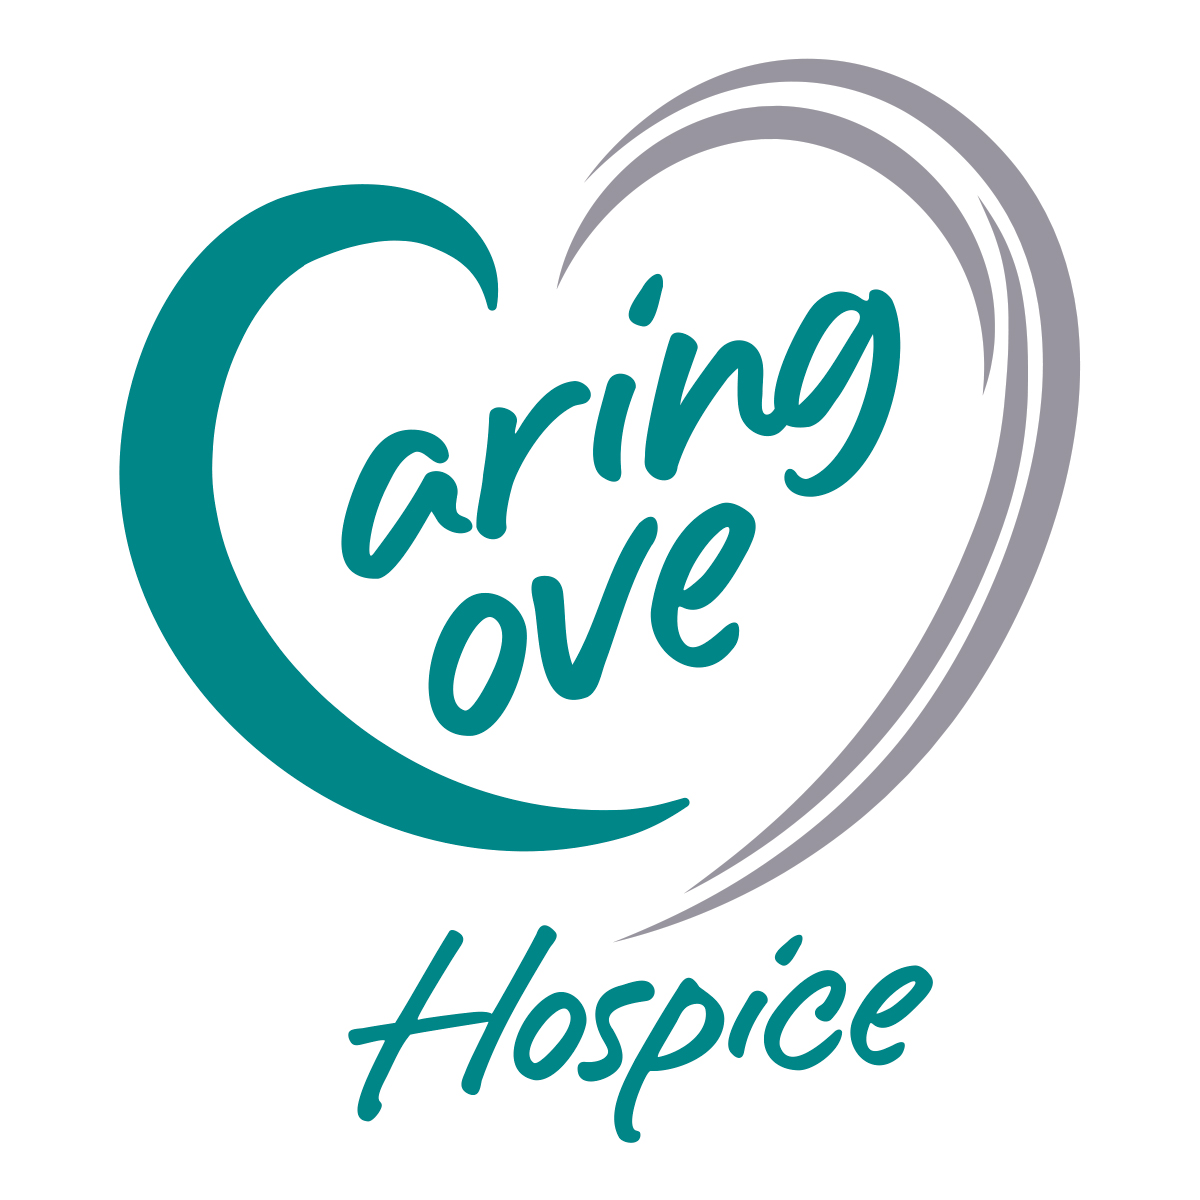 Caring Cove Hospice